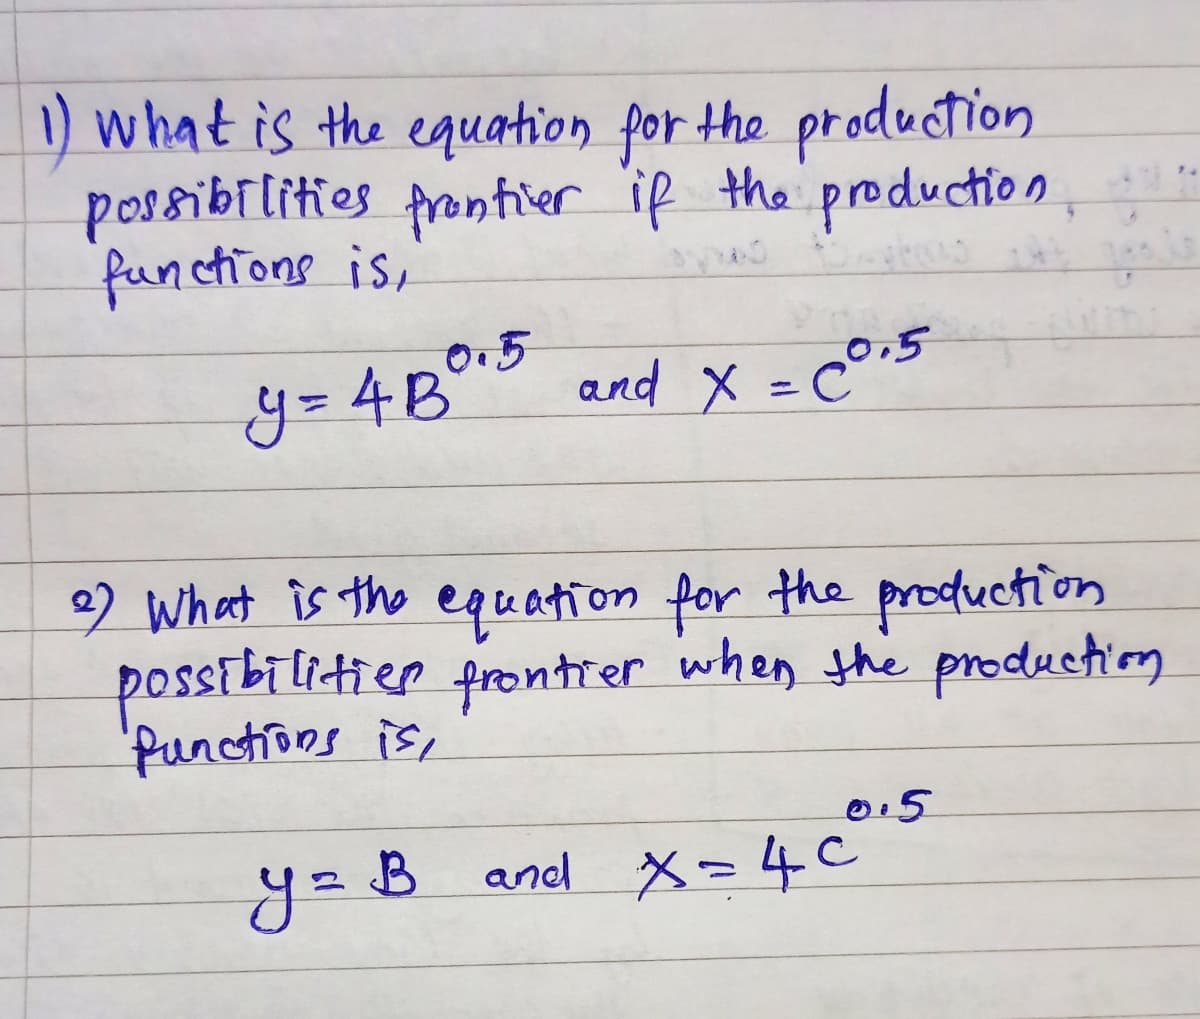 1) what is the equation for the production
porsibilities prontier if the production
functions is,
0.5
y=4B and X - c°5
e) What is the equ ation for the production
possibilitier frontrer when the production
Punctions is,
0.5
y= B and X=4C
